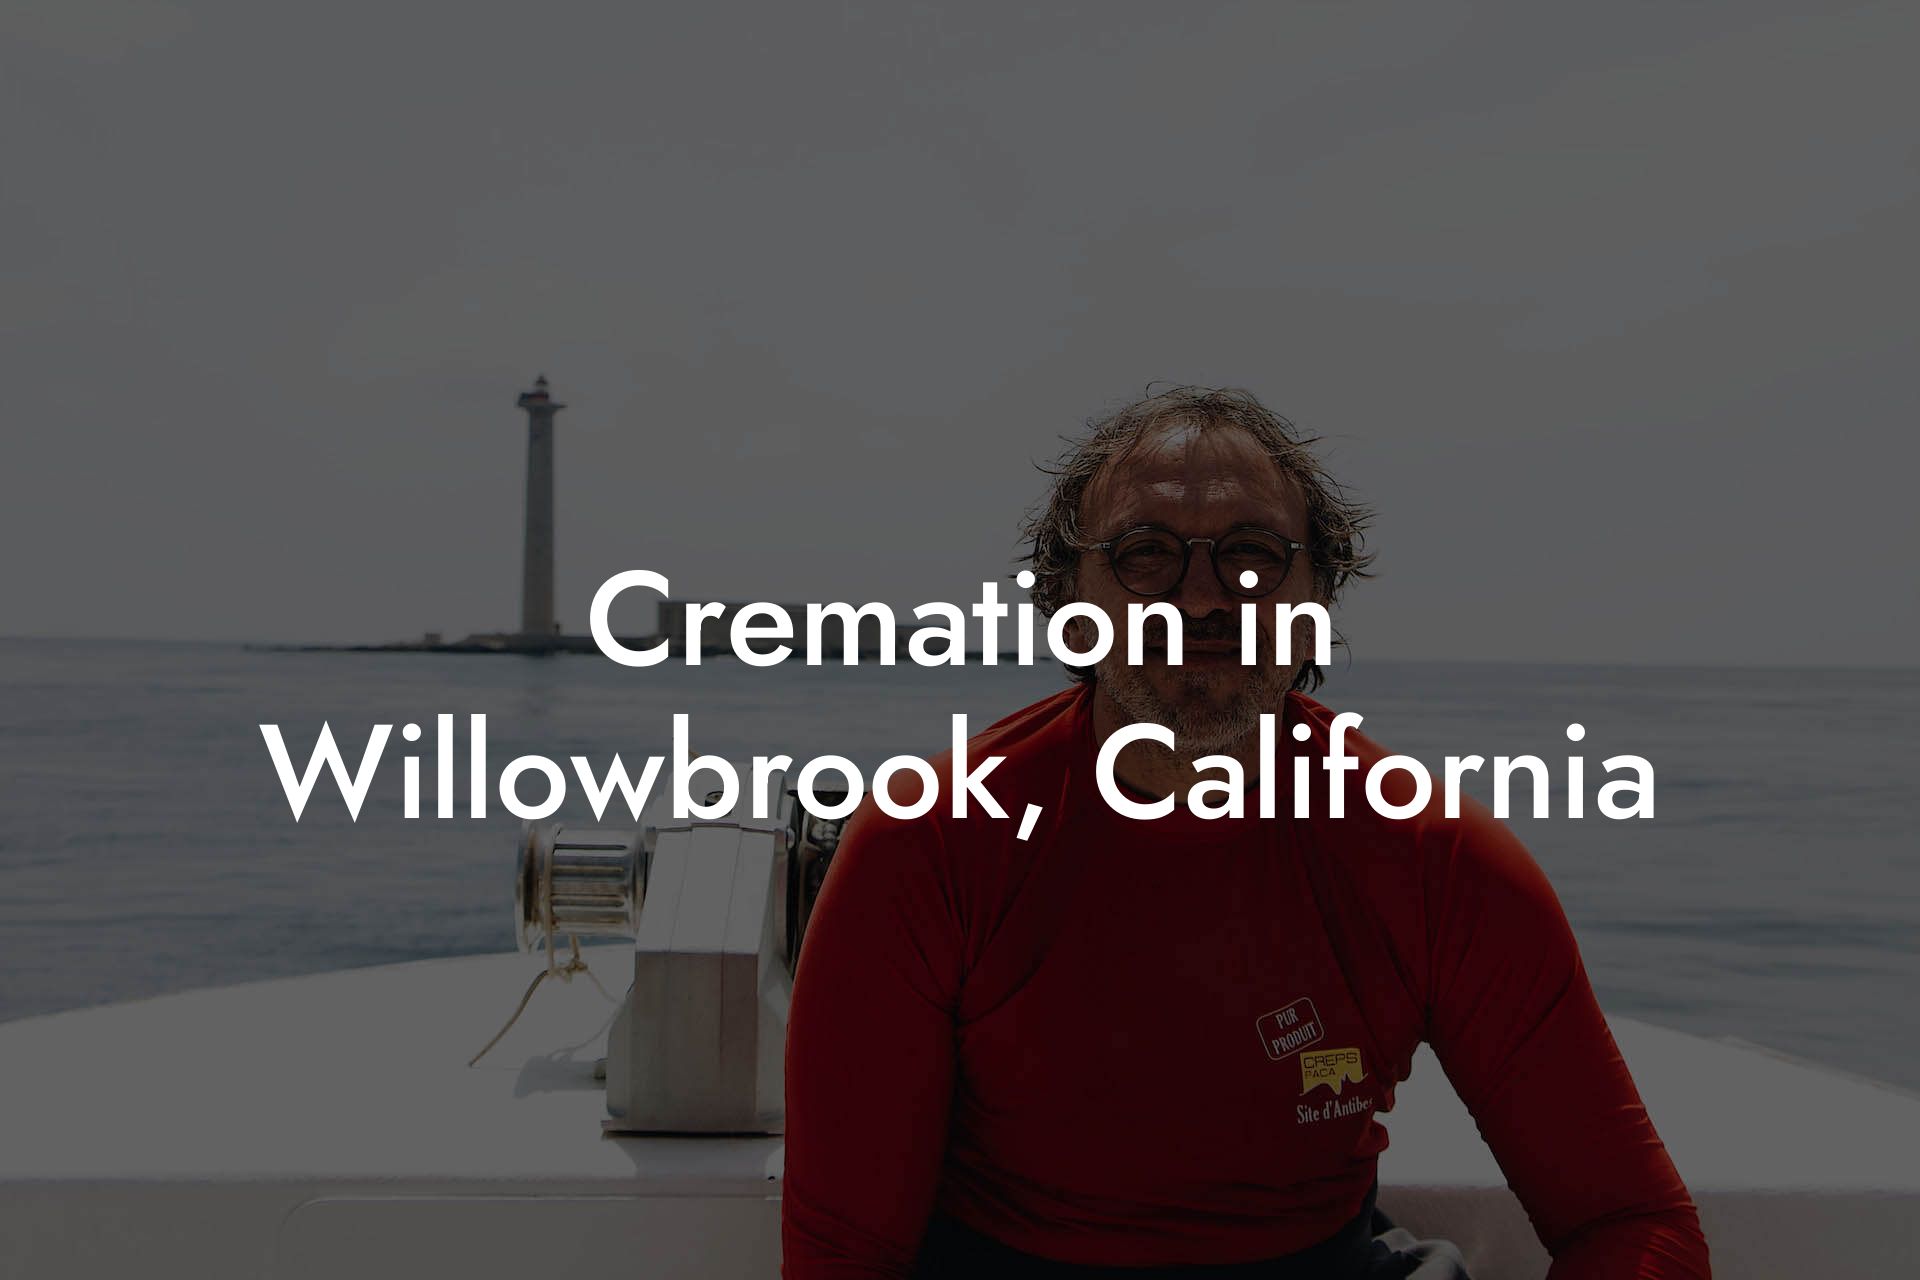 Cremation in Willowbrook, California